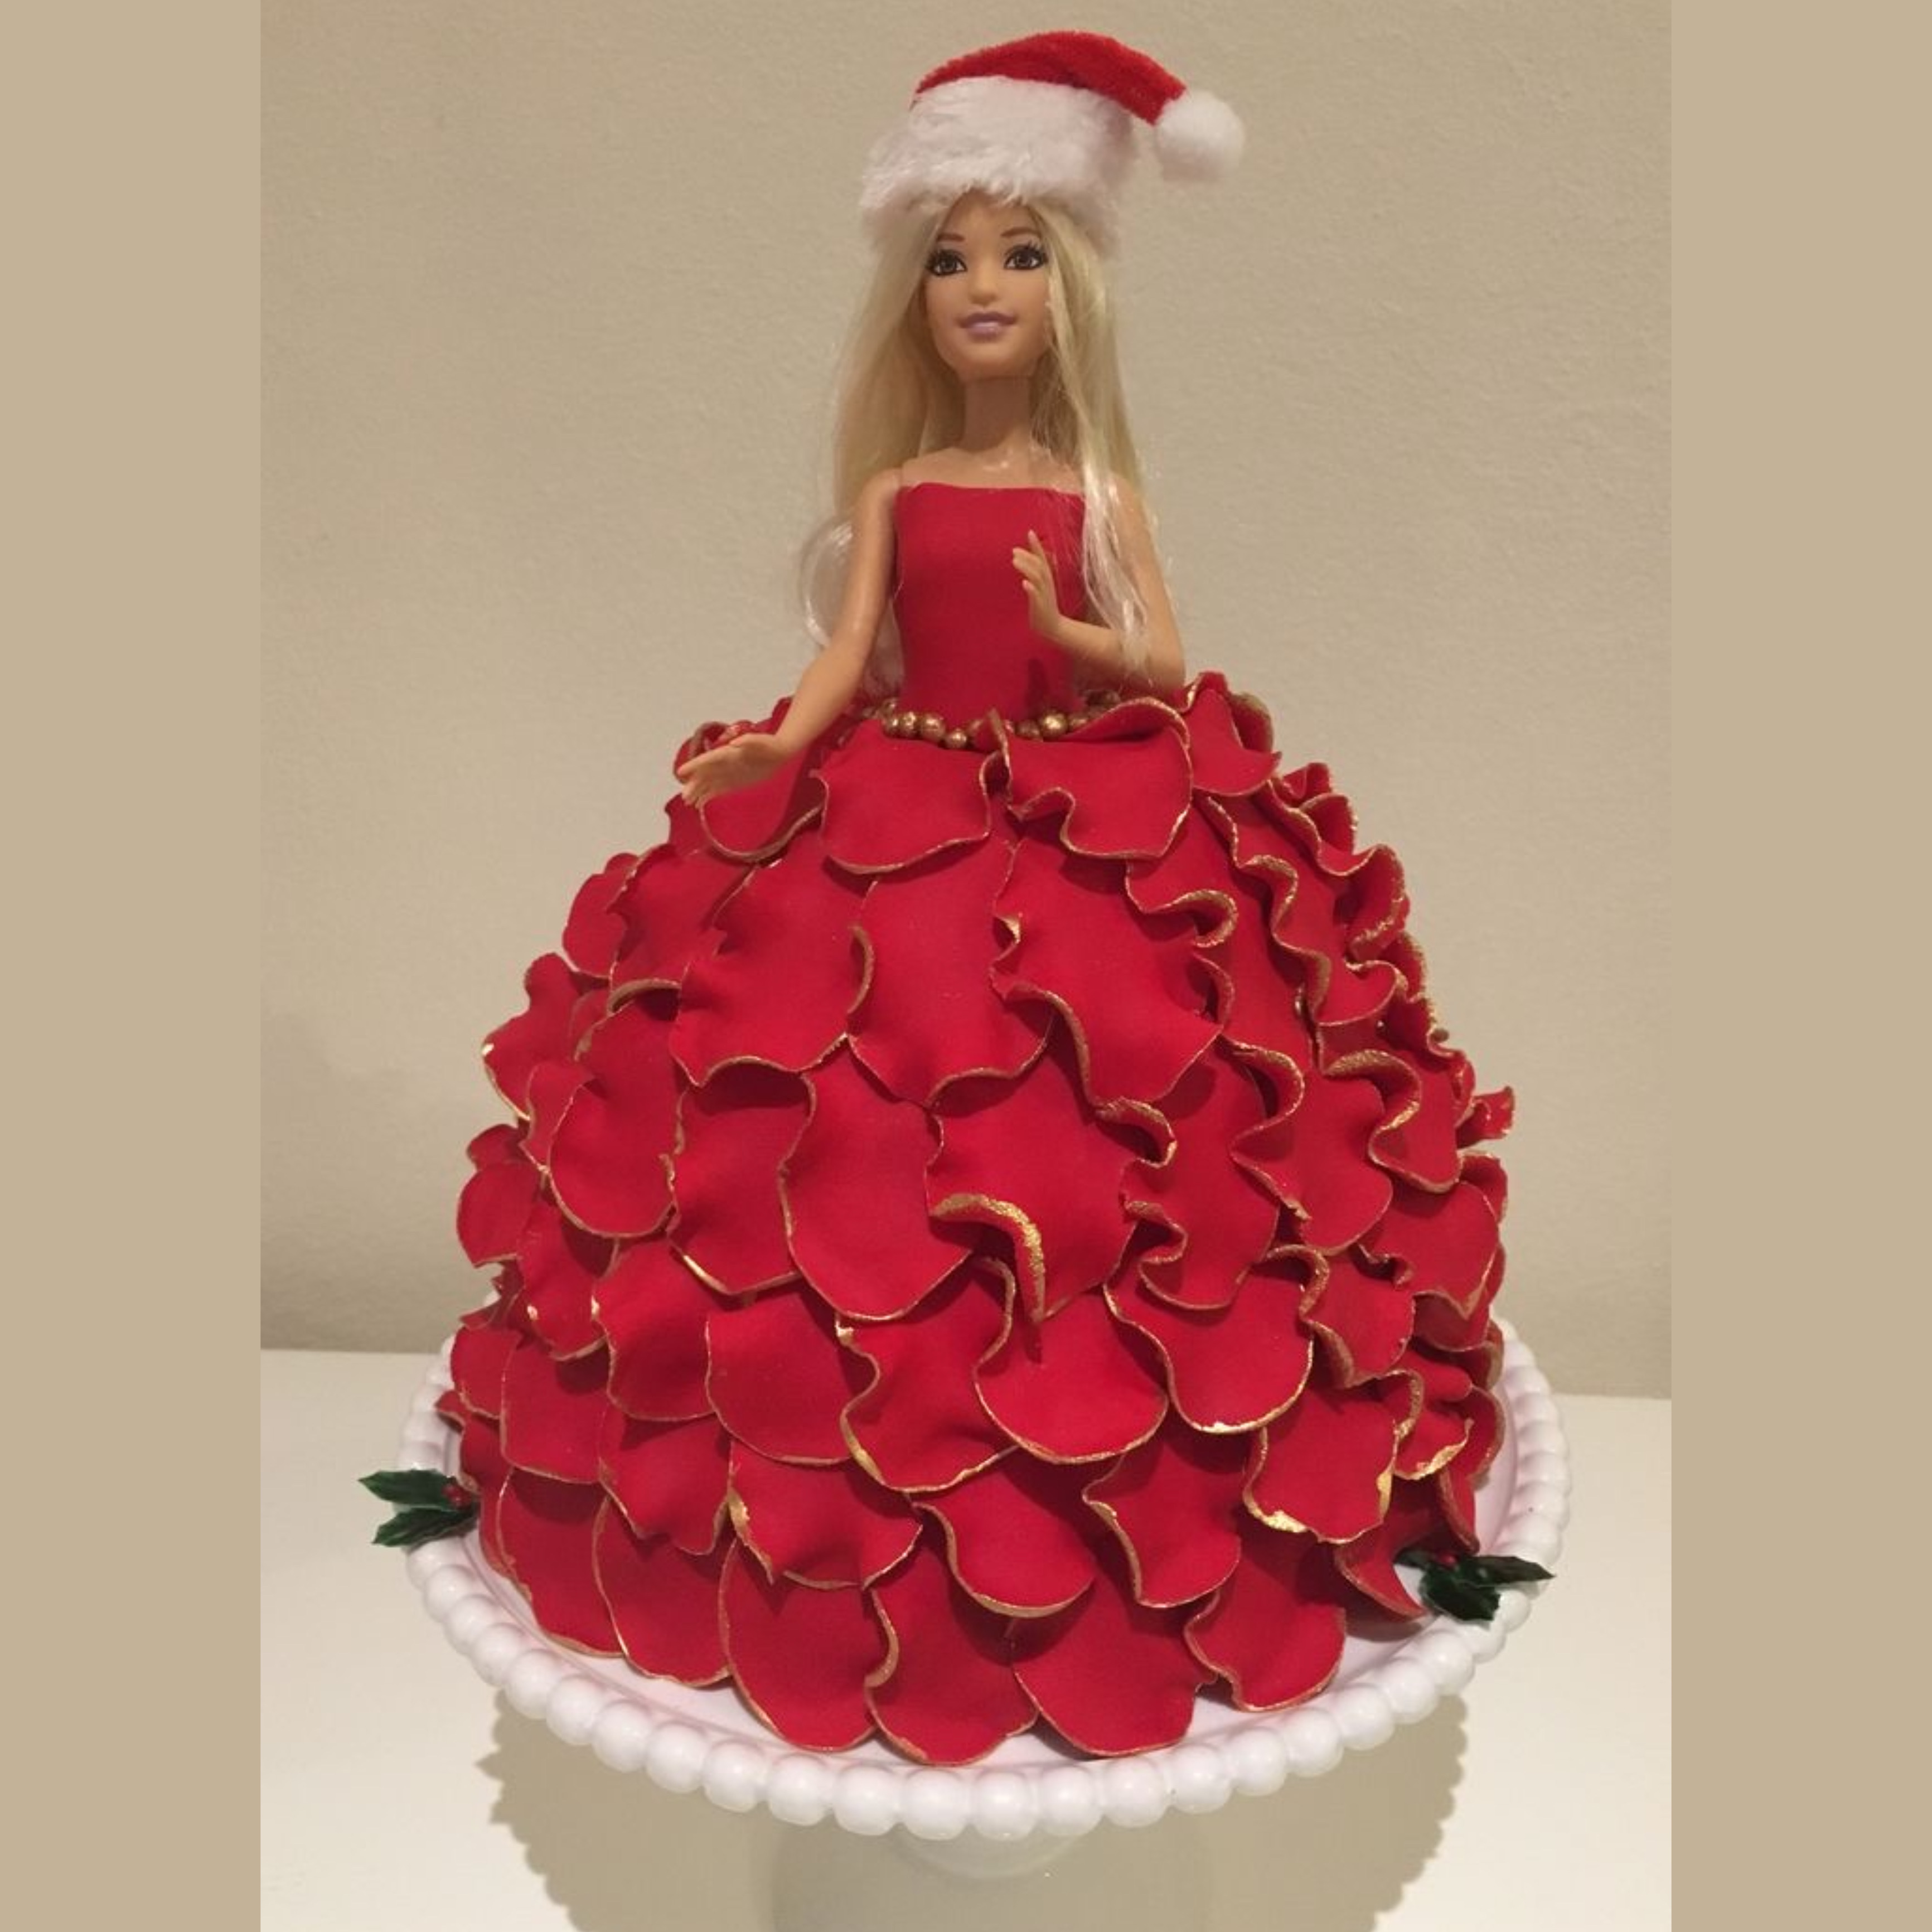 Little princess 4D jelly cake, Food & Drinks, Homemade Bakes on Carousell